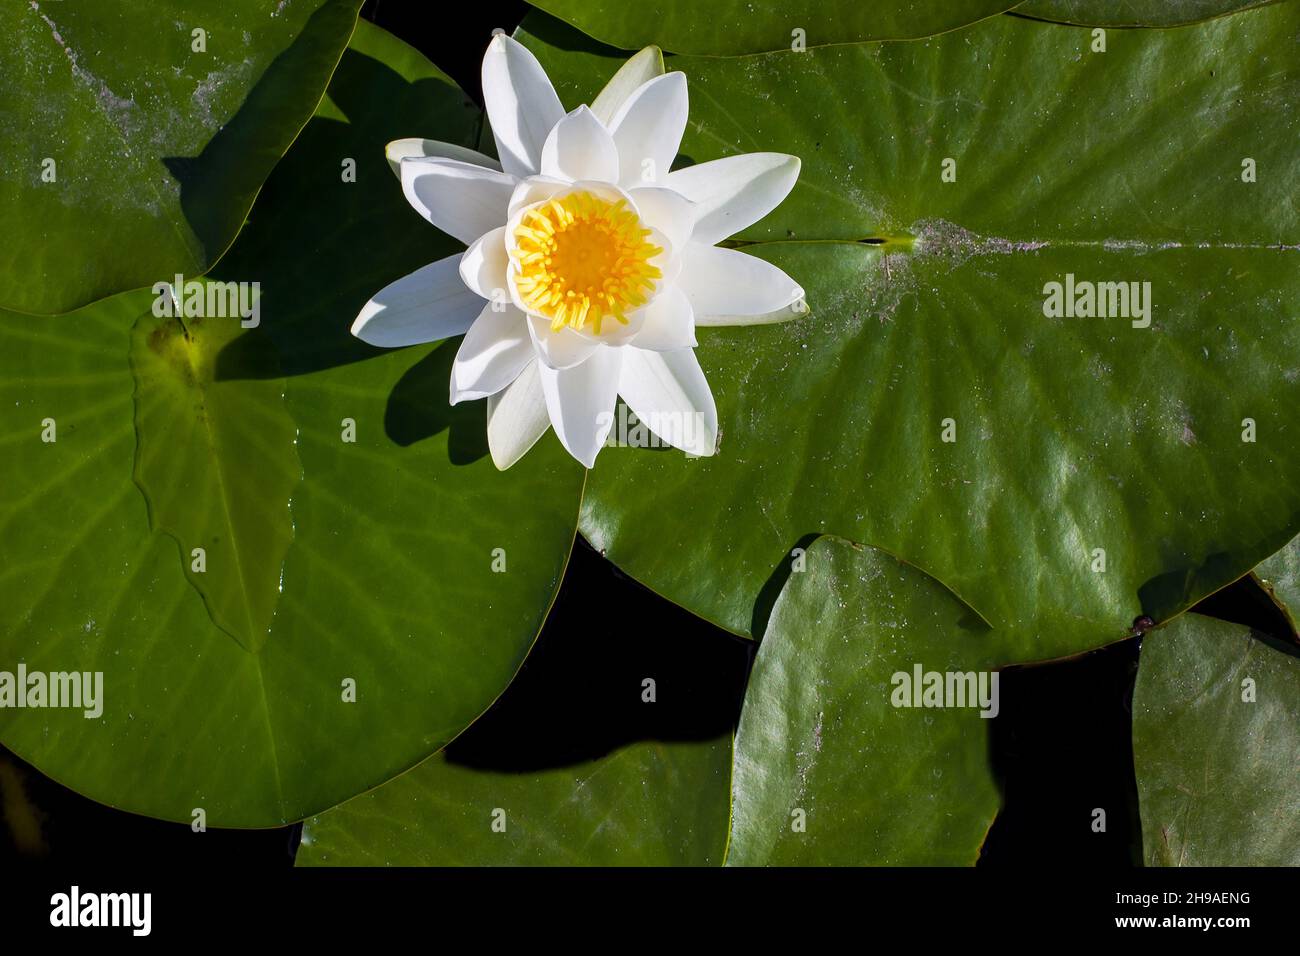 water lilies green leaves on a pond with white blooming lotus flowers illuminated by sunny summer light, river lily top view natural background. Stock Photo